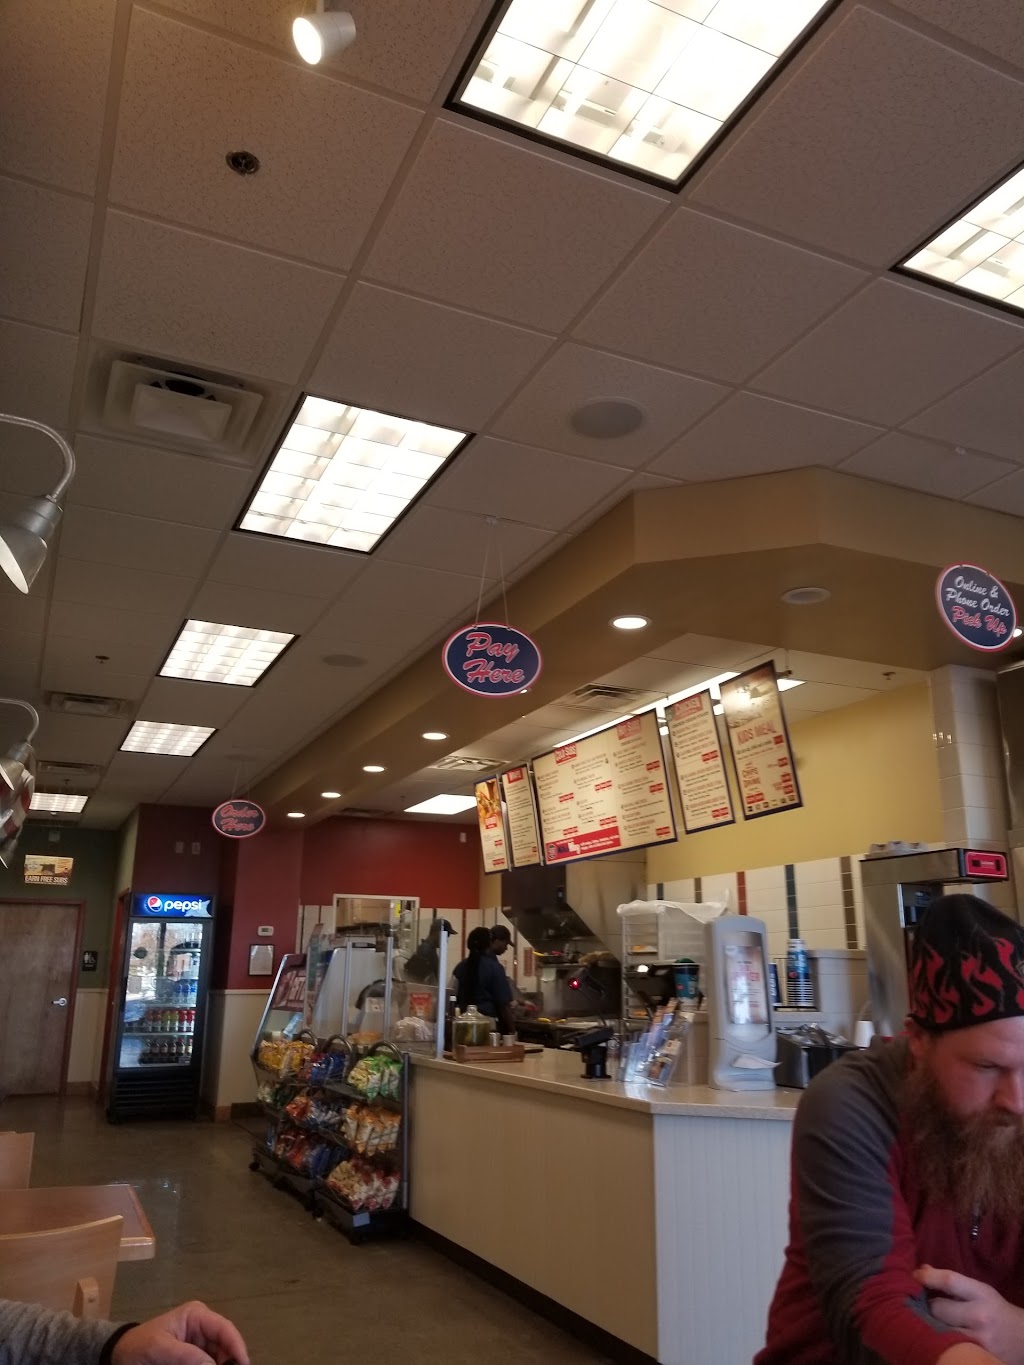 Jersey Mikes Subs | 3805 Dallas Hwy Suite 814, Marietta, GA 30064, USA | Phone: (770) 955-0586